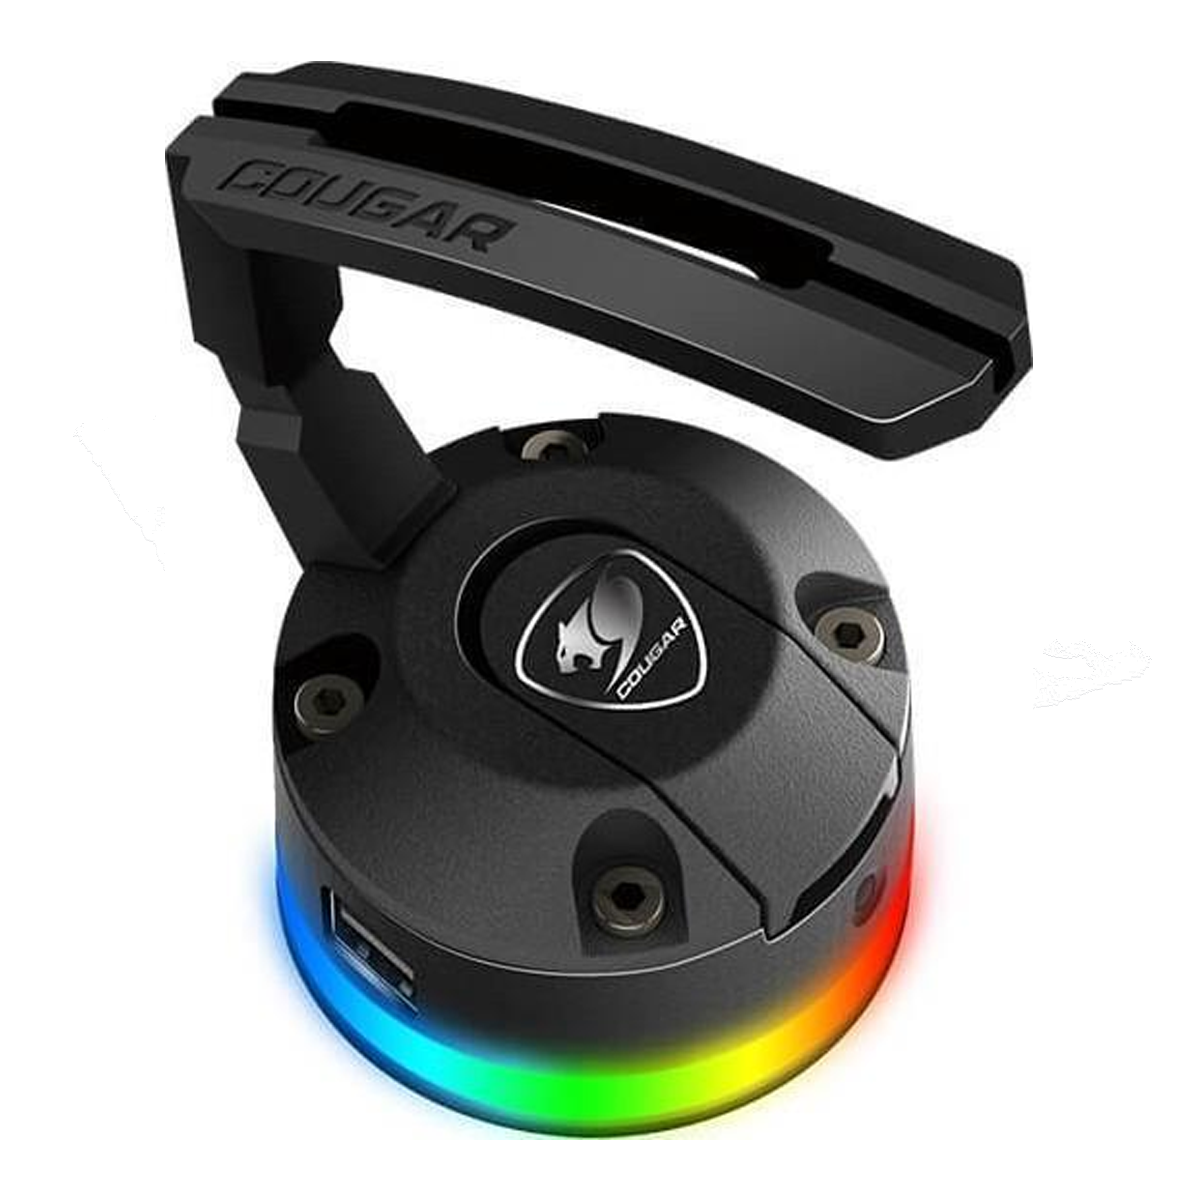 Cougar Bunker RGB Gaming Mouse Bungee with USB Hub